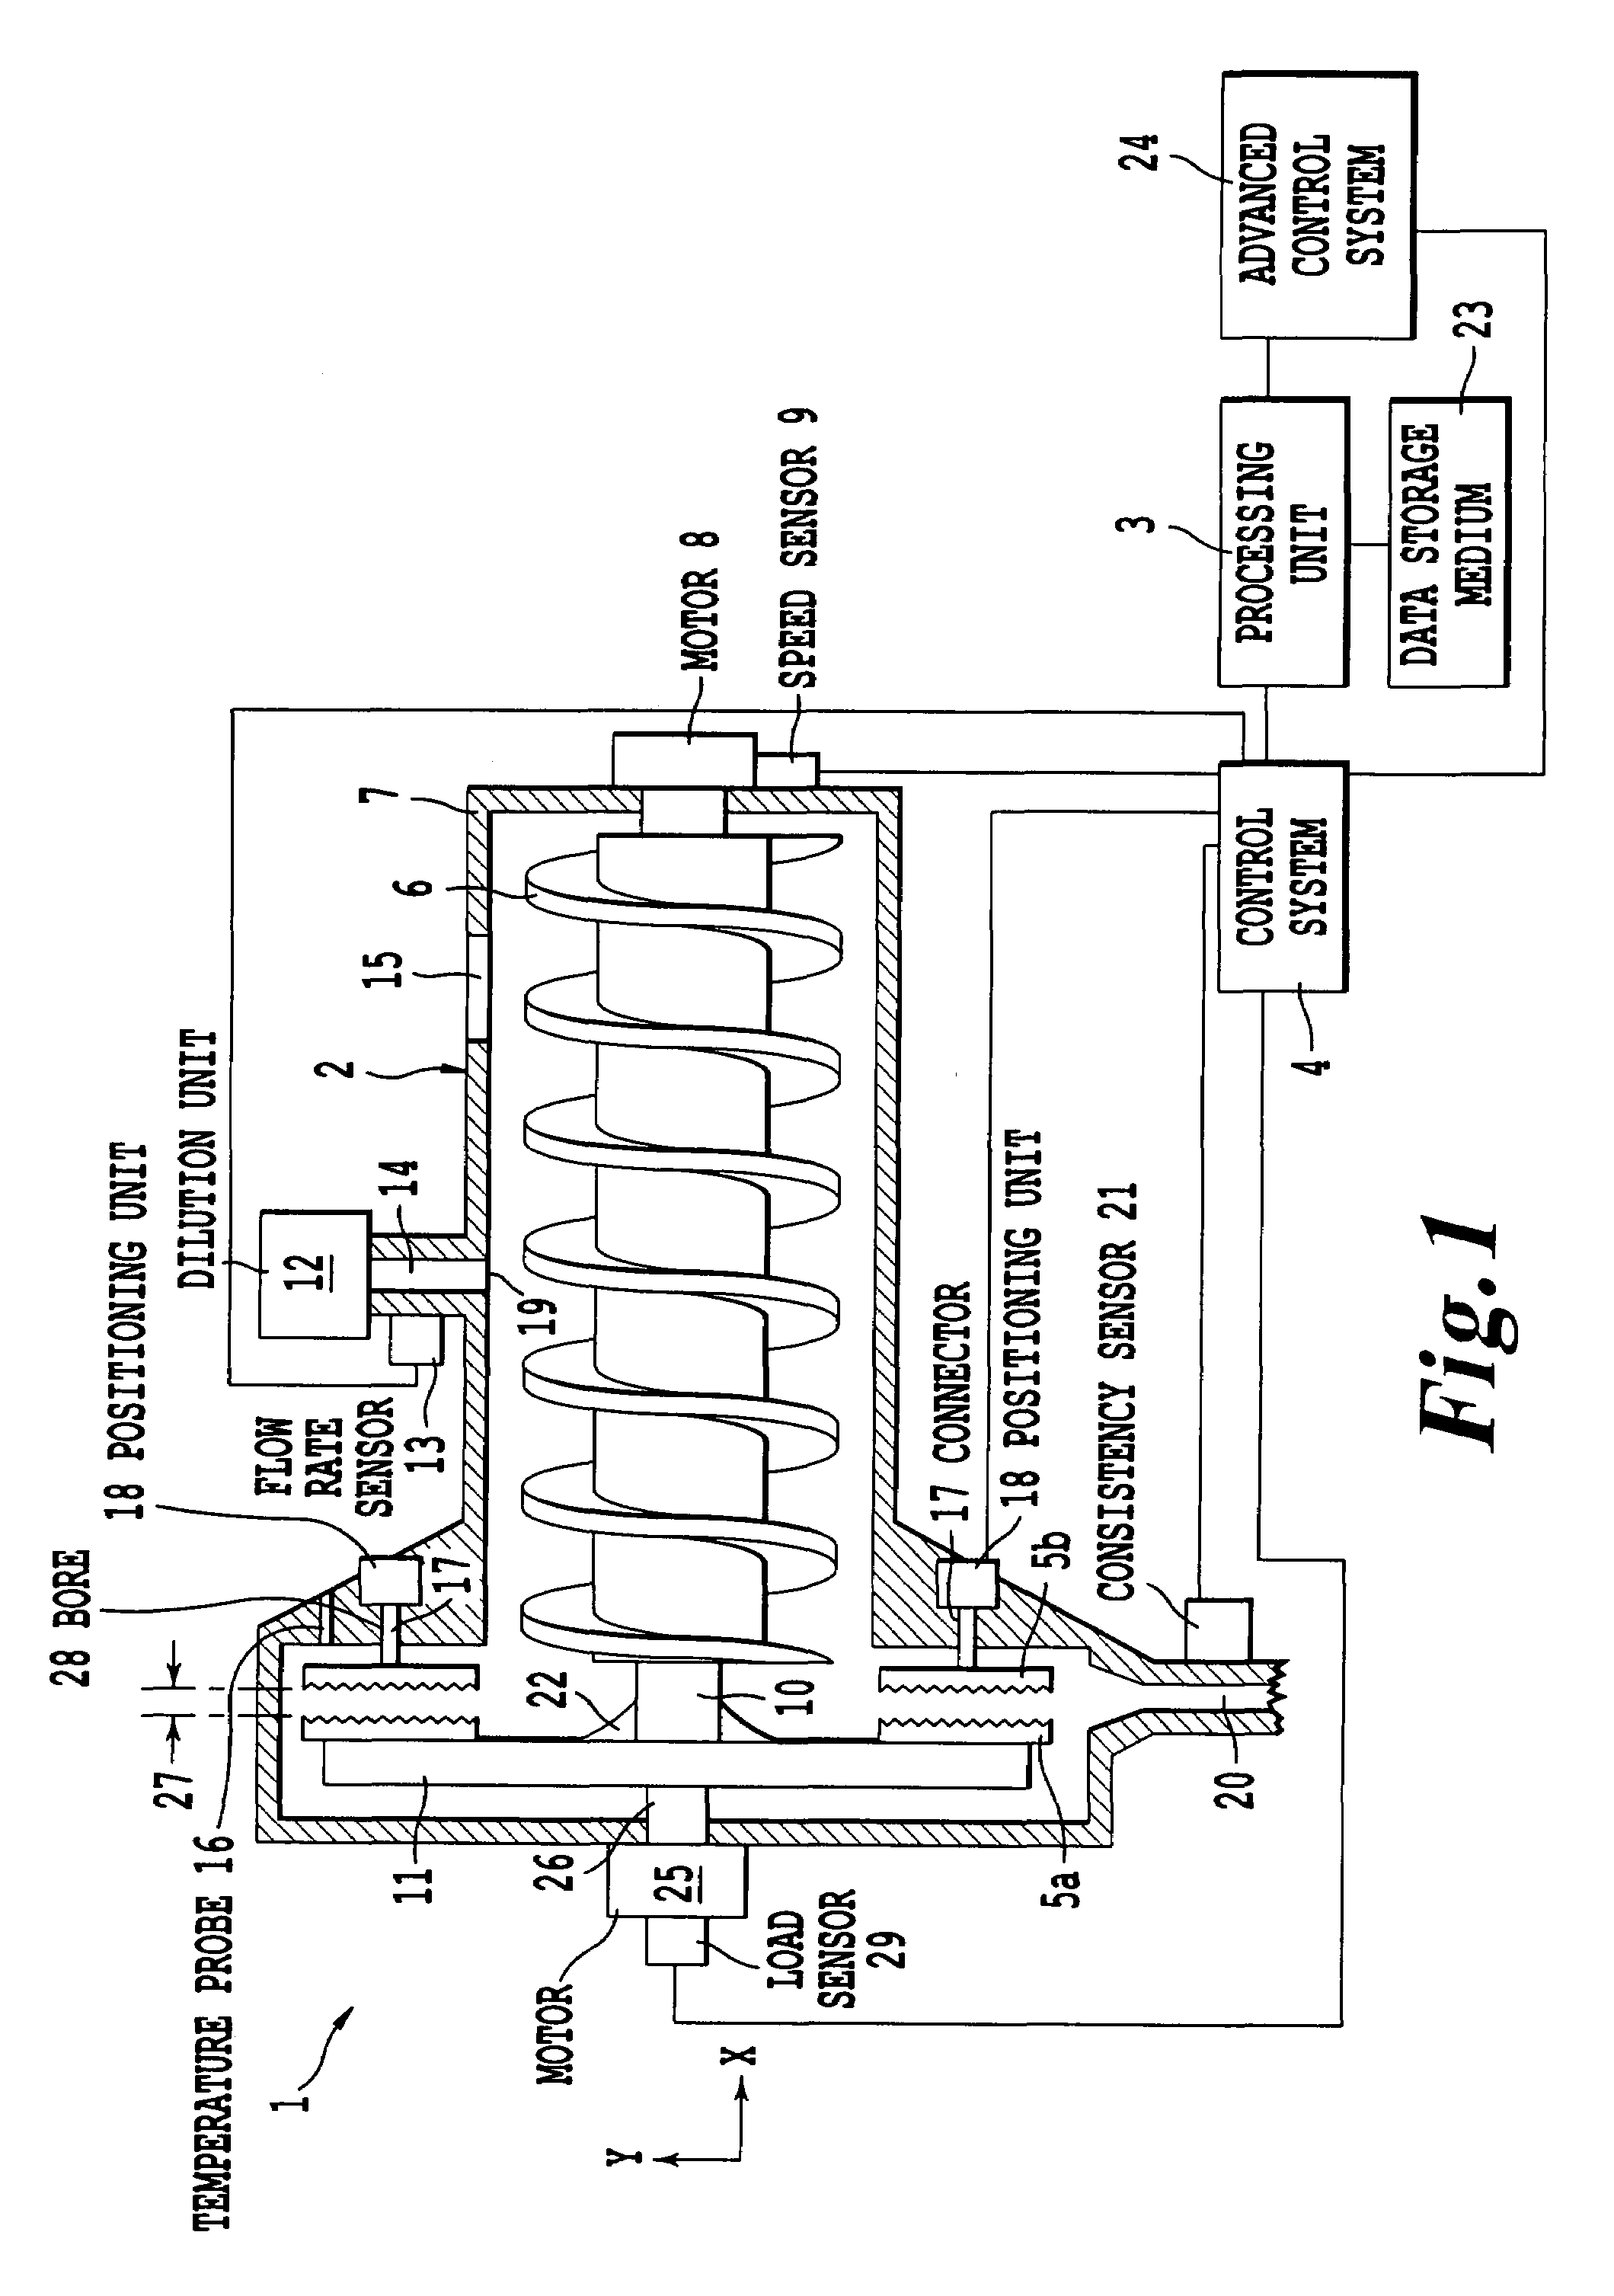 System and method for estimating production and feed consistency disturbances